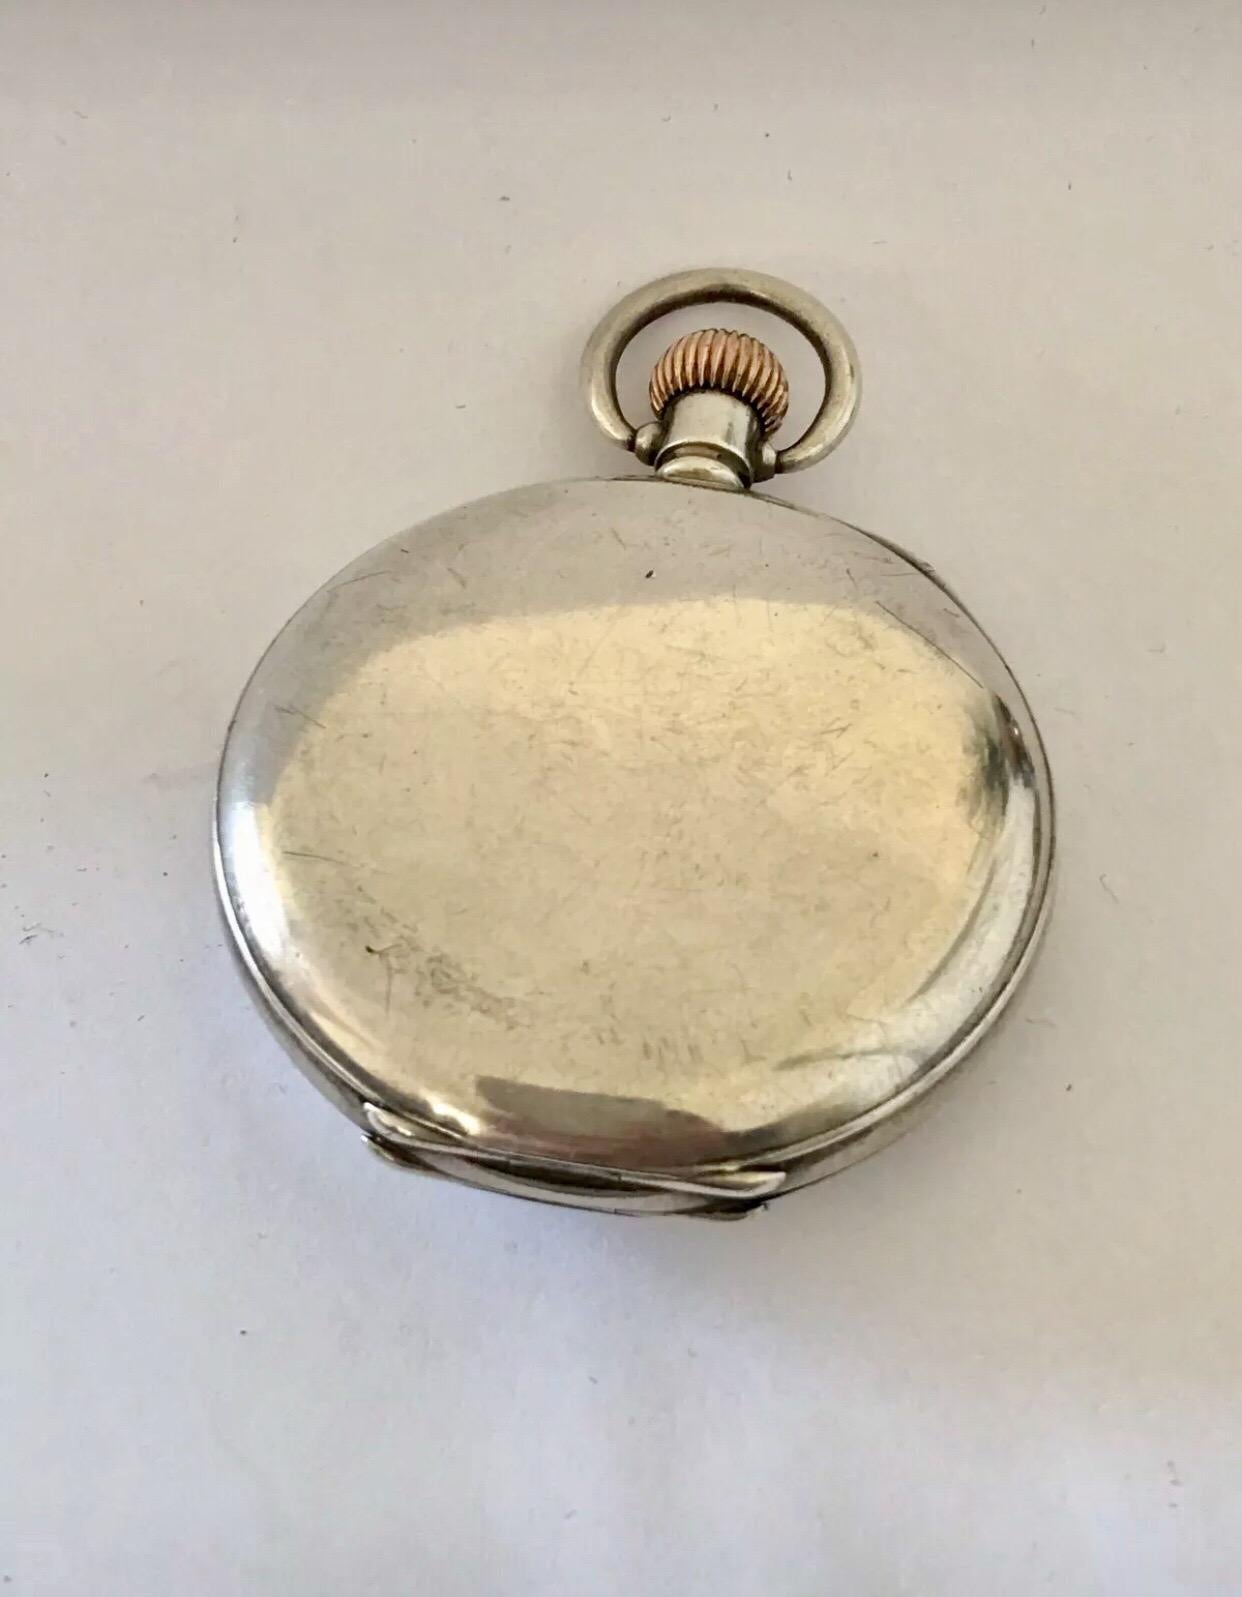 Antique Silver Half Hunter Pocket Watch.


This heavy beautiful silver half hunter pocket watch is in good Working condition and it is ticking nicely